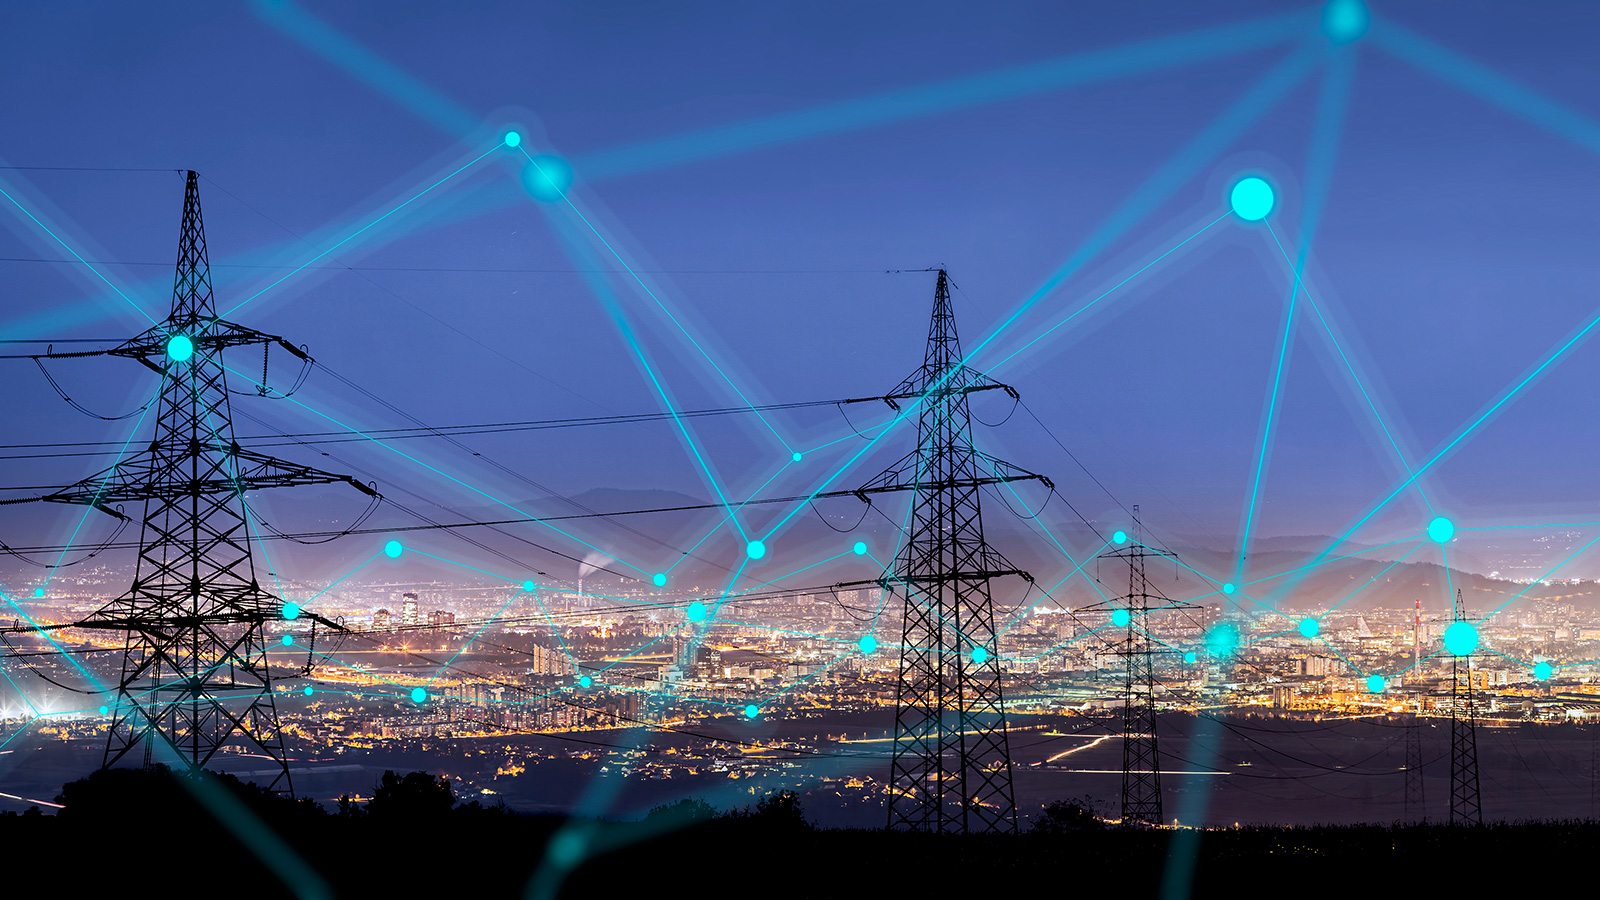 Researchers at Argonne National Laboratory are working on optimization models that use machine learning, a form of artificial intelligence, to simulate the electric system and the severity of various problems. In a region with 1,000 electric power assets, an outage of just three assets can produce nearly a billion scenarios of potential failure. Image by urbans/Shutterstock.com.